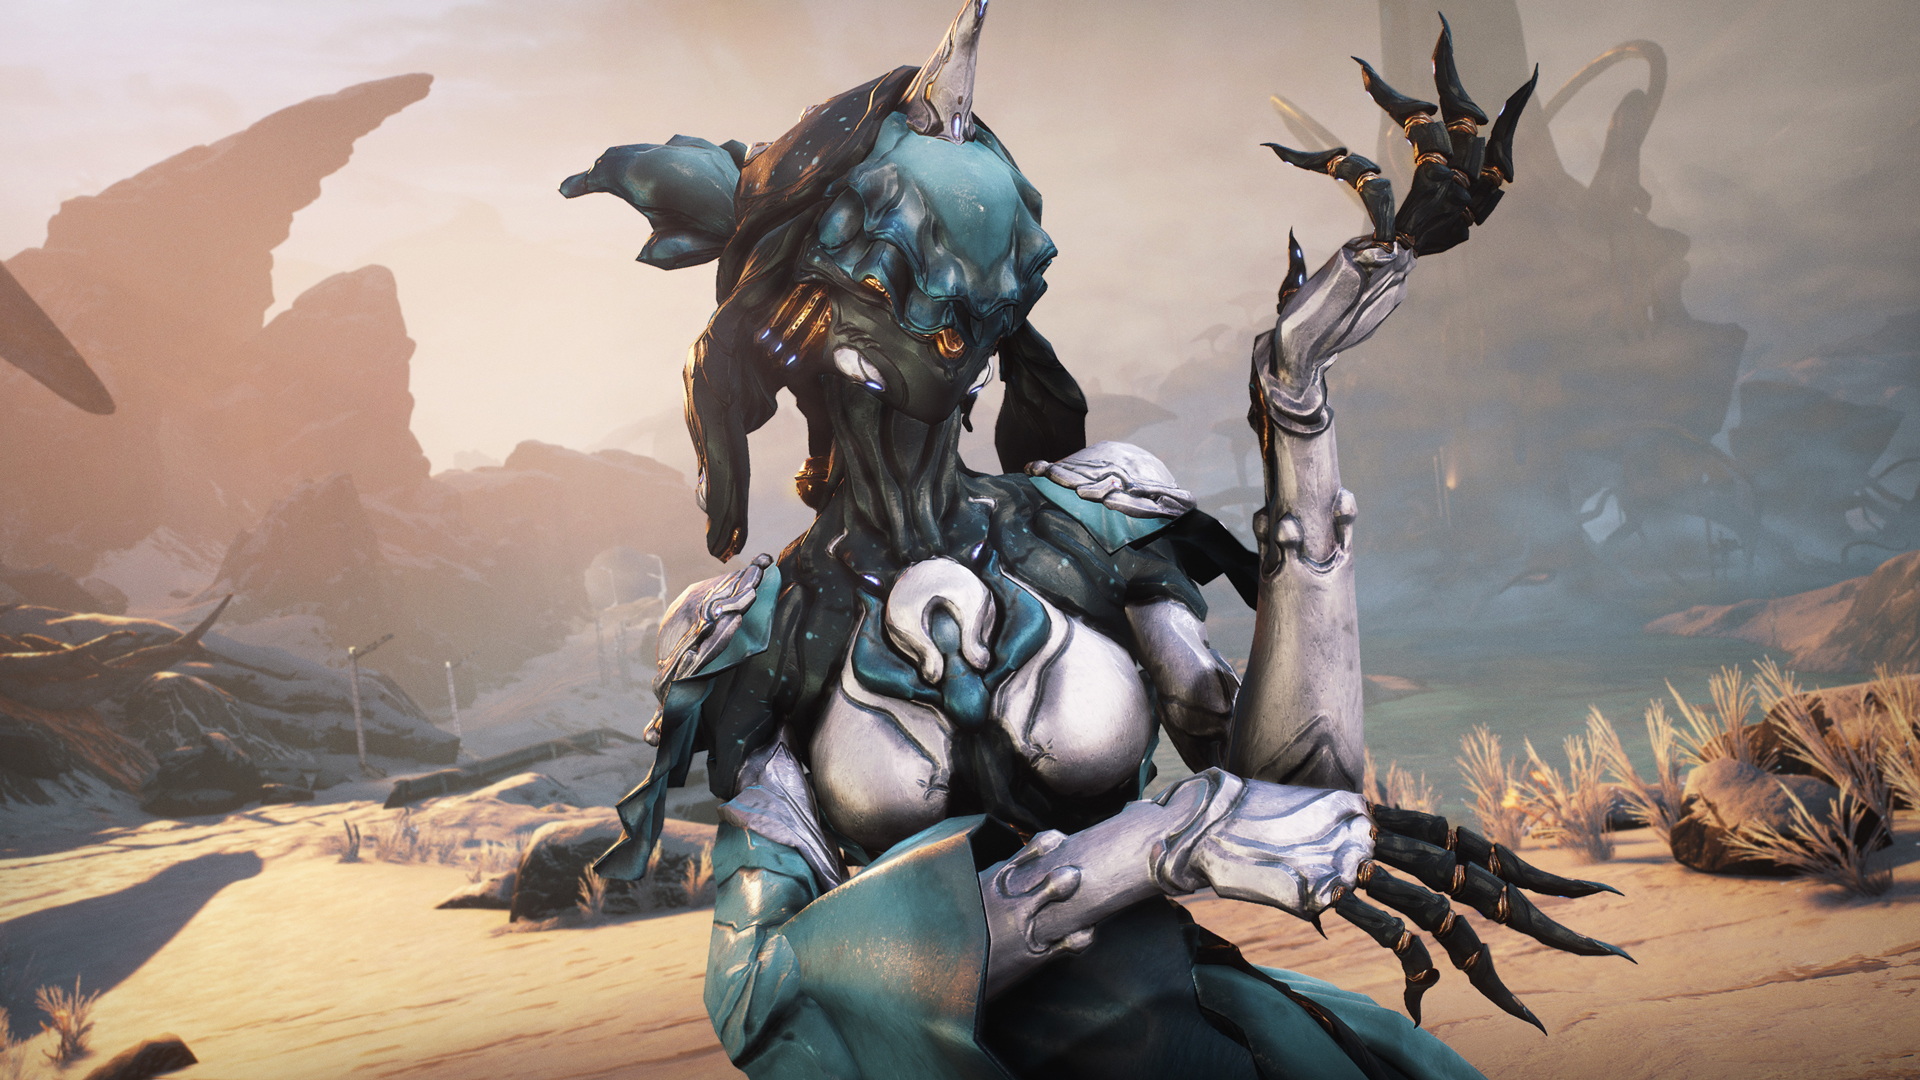 Warframe’s pirate radio host is back with Nightwave: Nora’s Choice